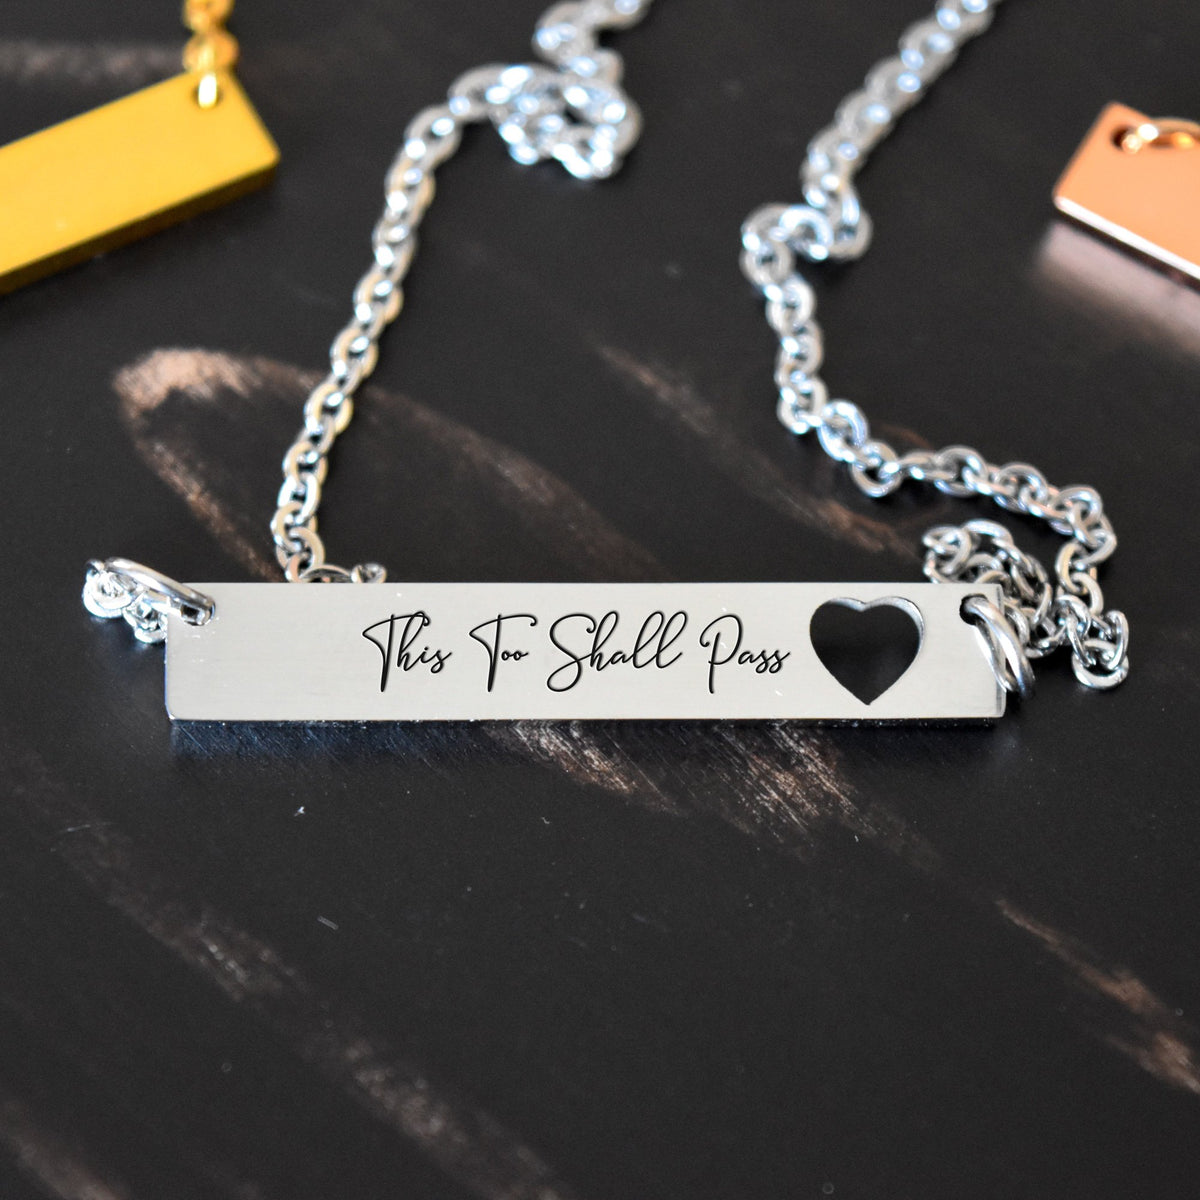 This Too Shall Pass - Engraved Necklace